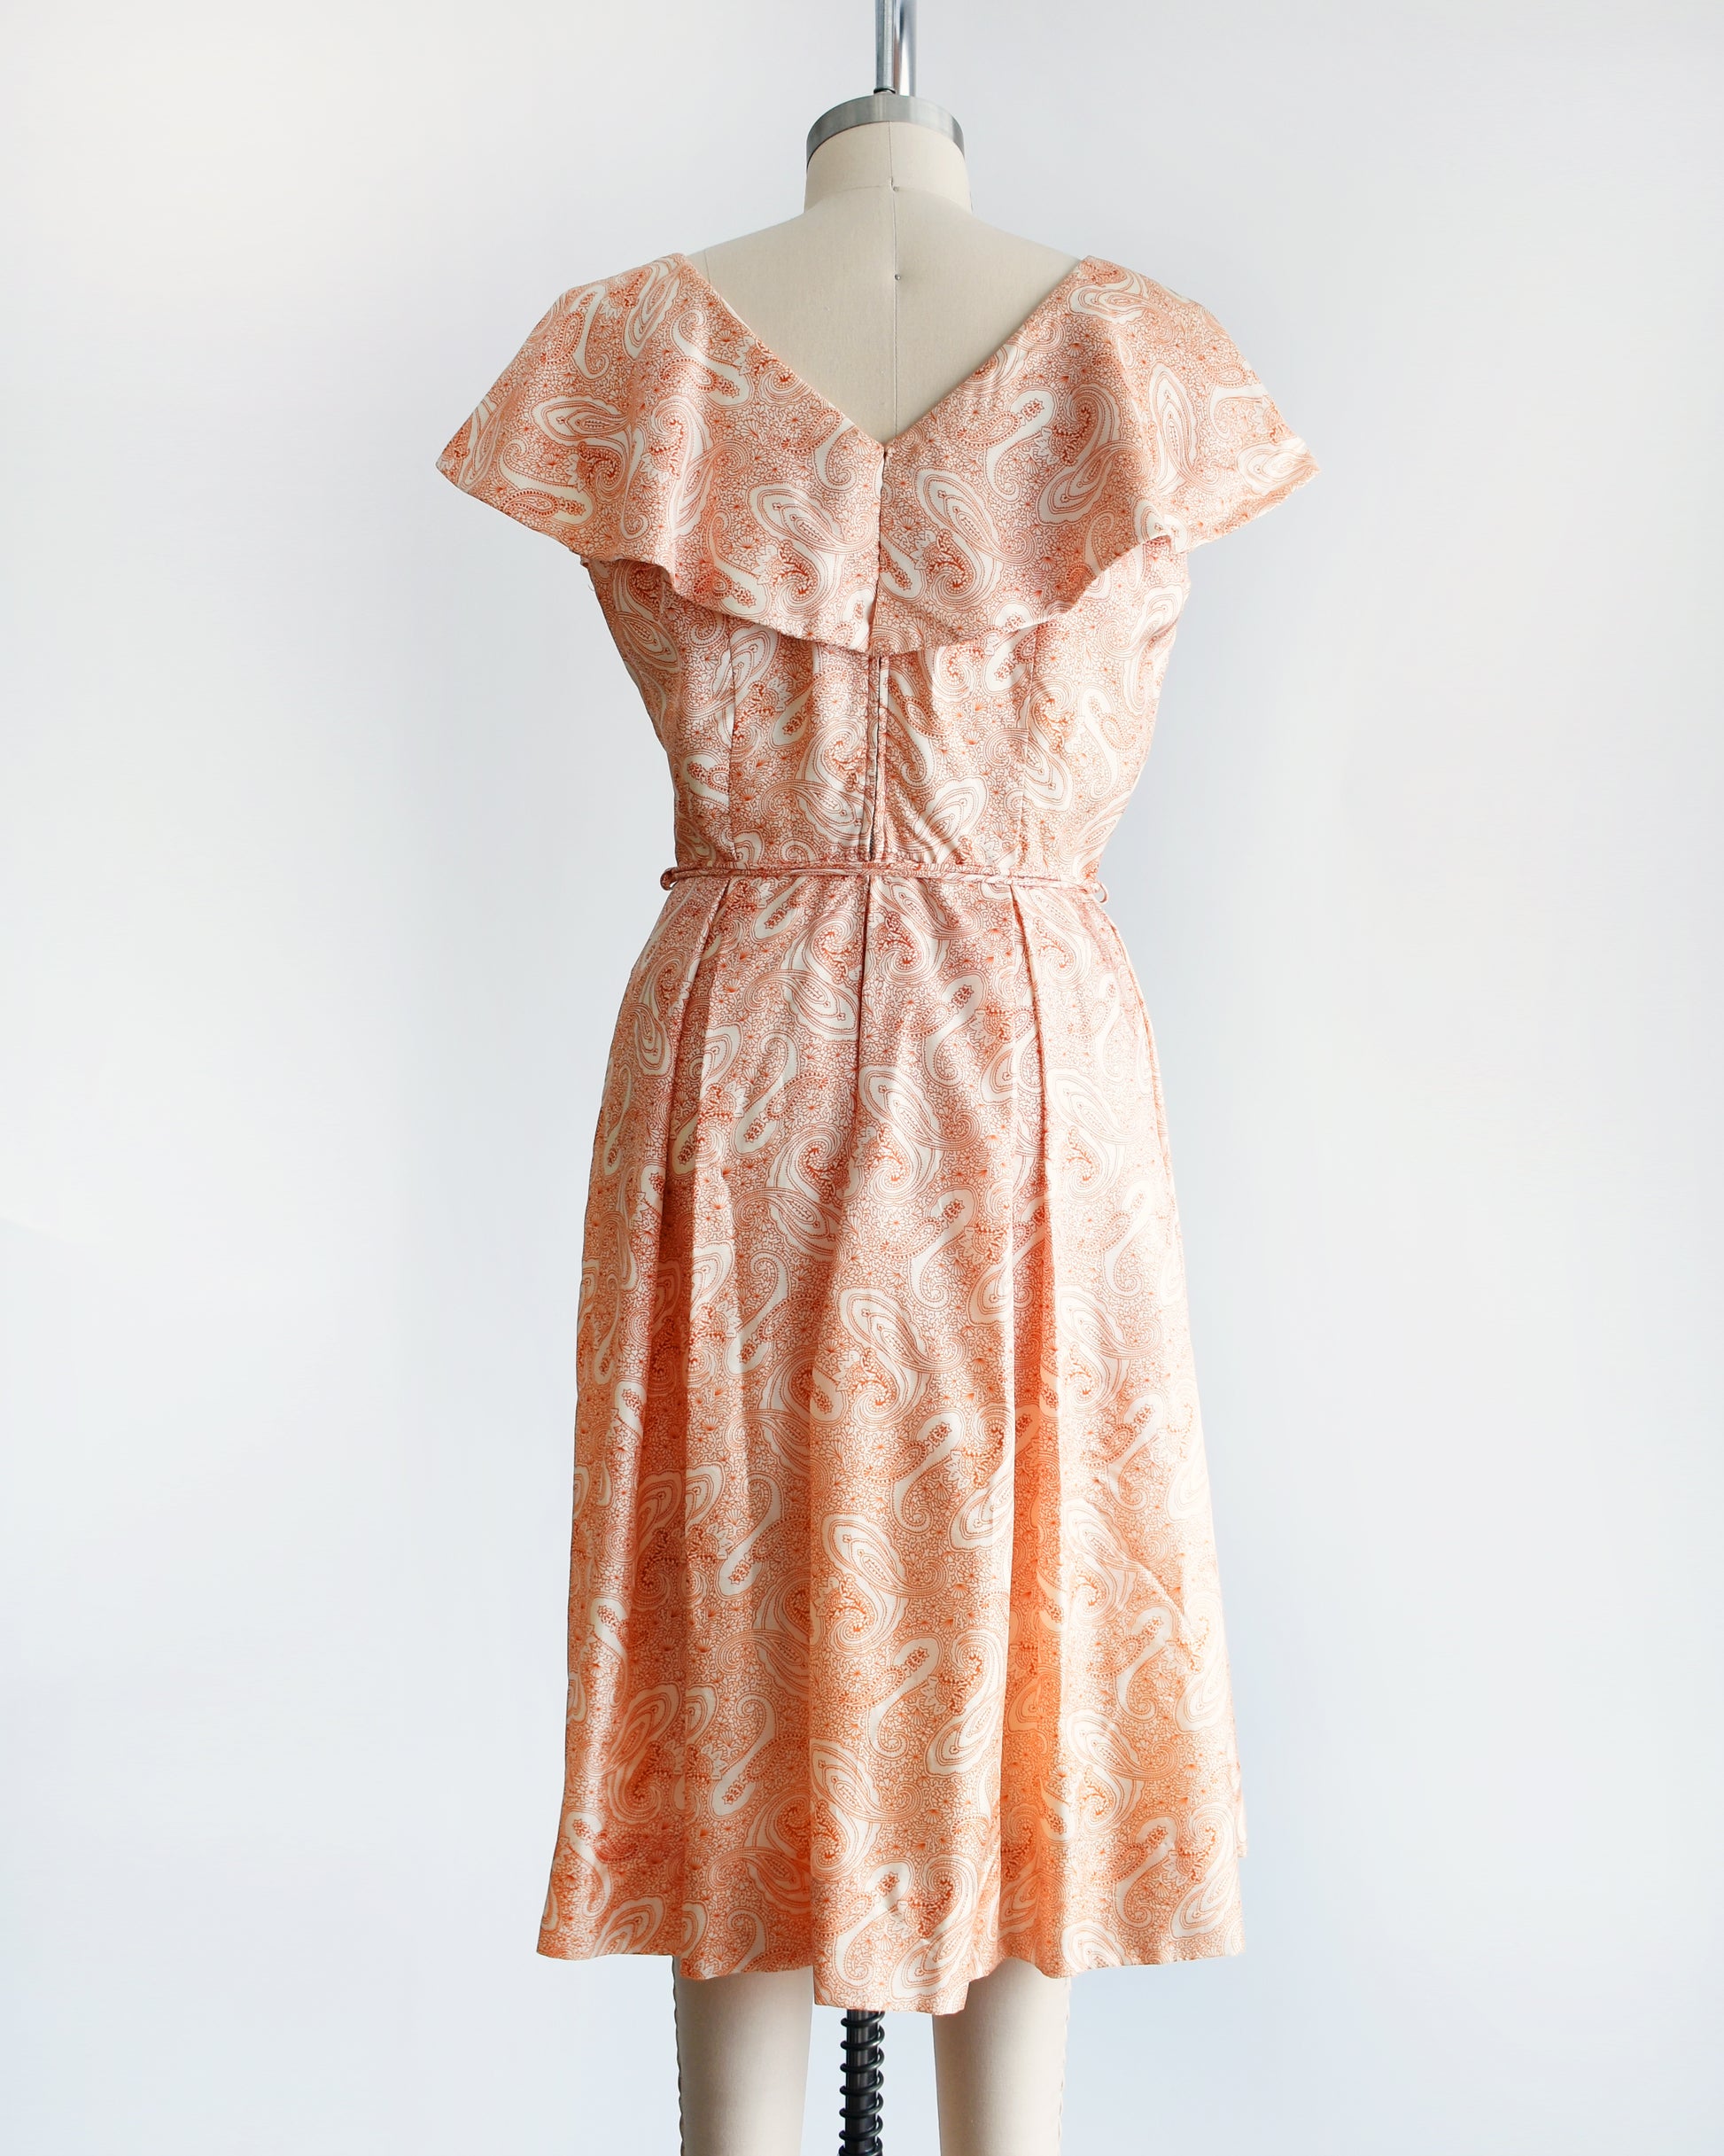 Back view of a vintage 1960s dress that features an orange and white paisley print, a ruffled neckline matching tie belt, and pleated skirt.